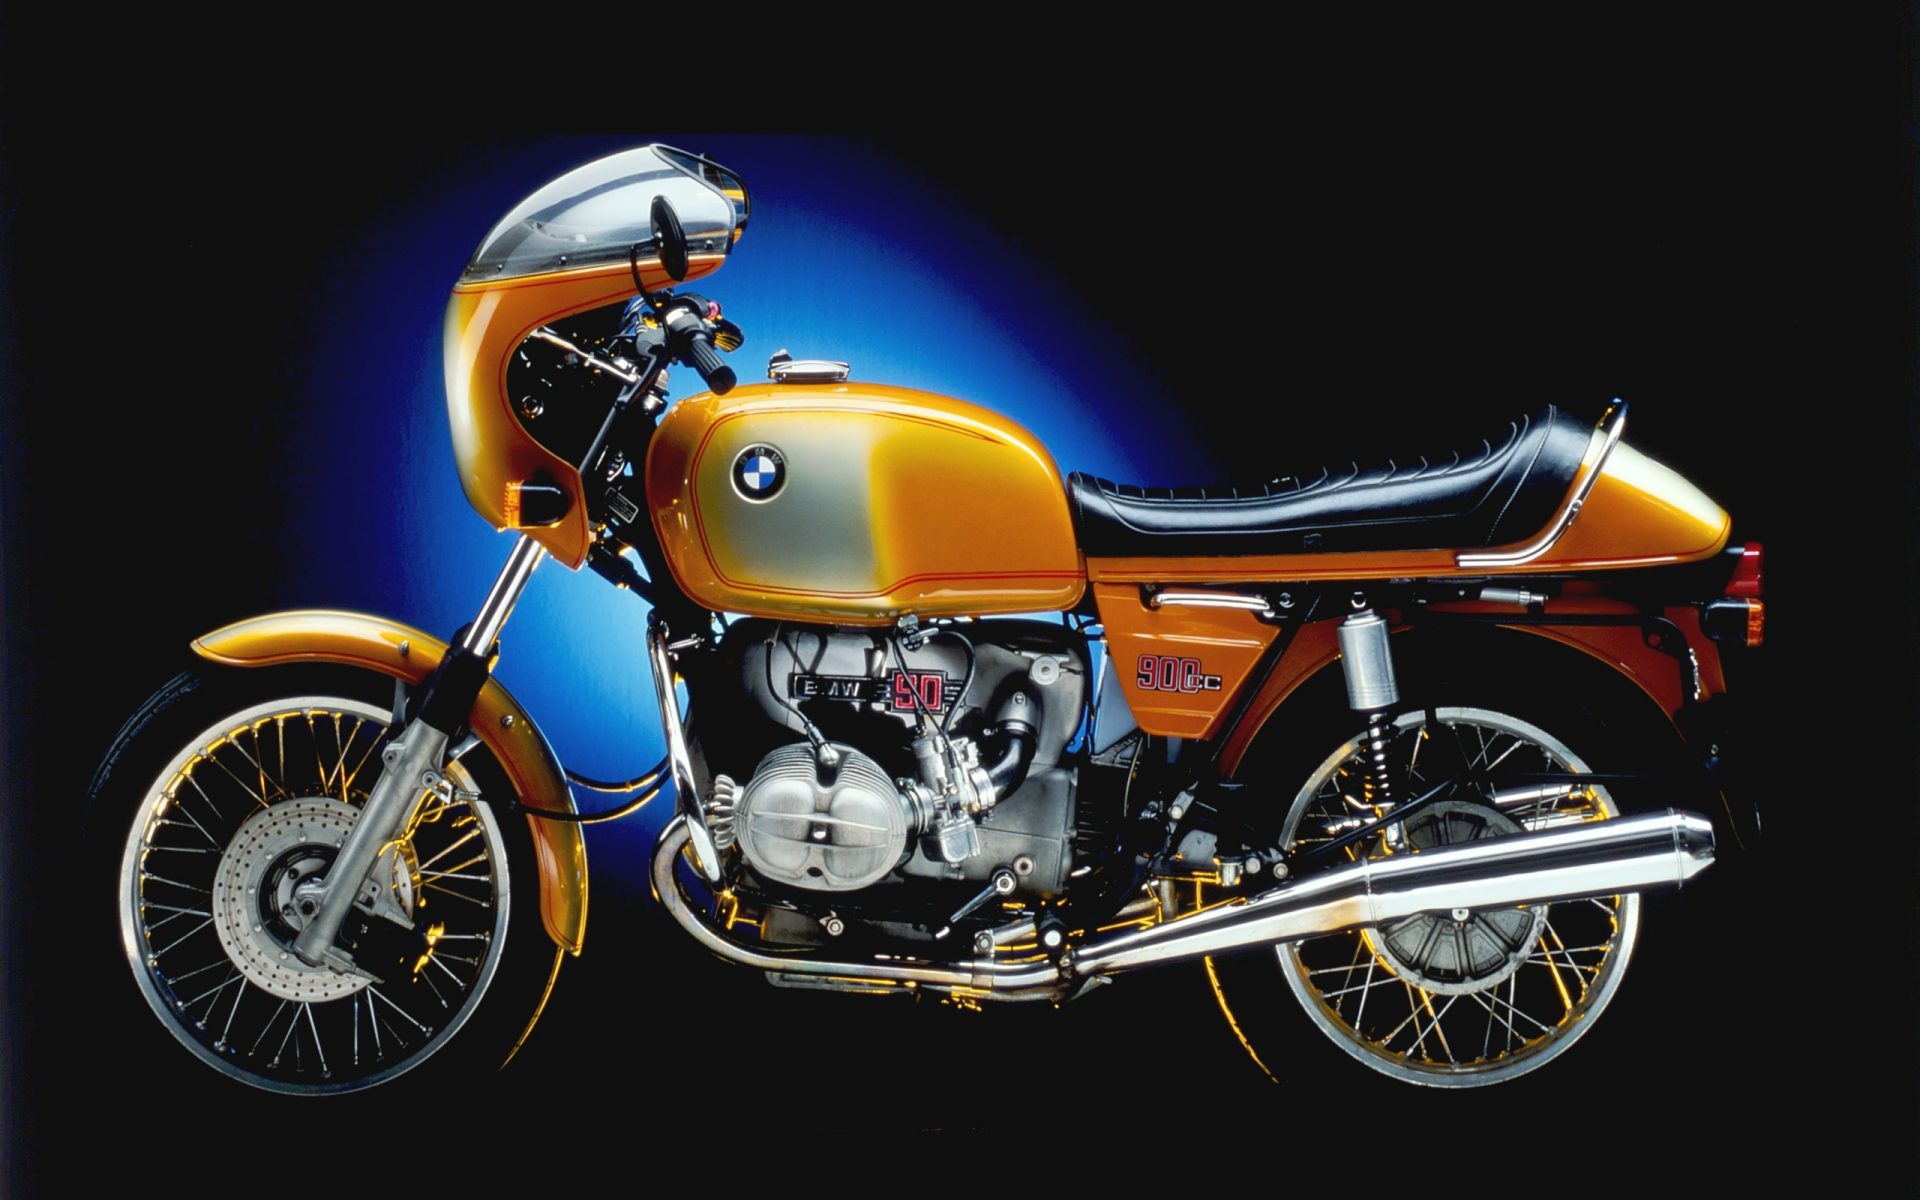 Image of 1973 BMW motorcycle